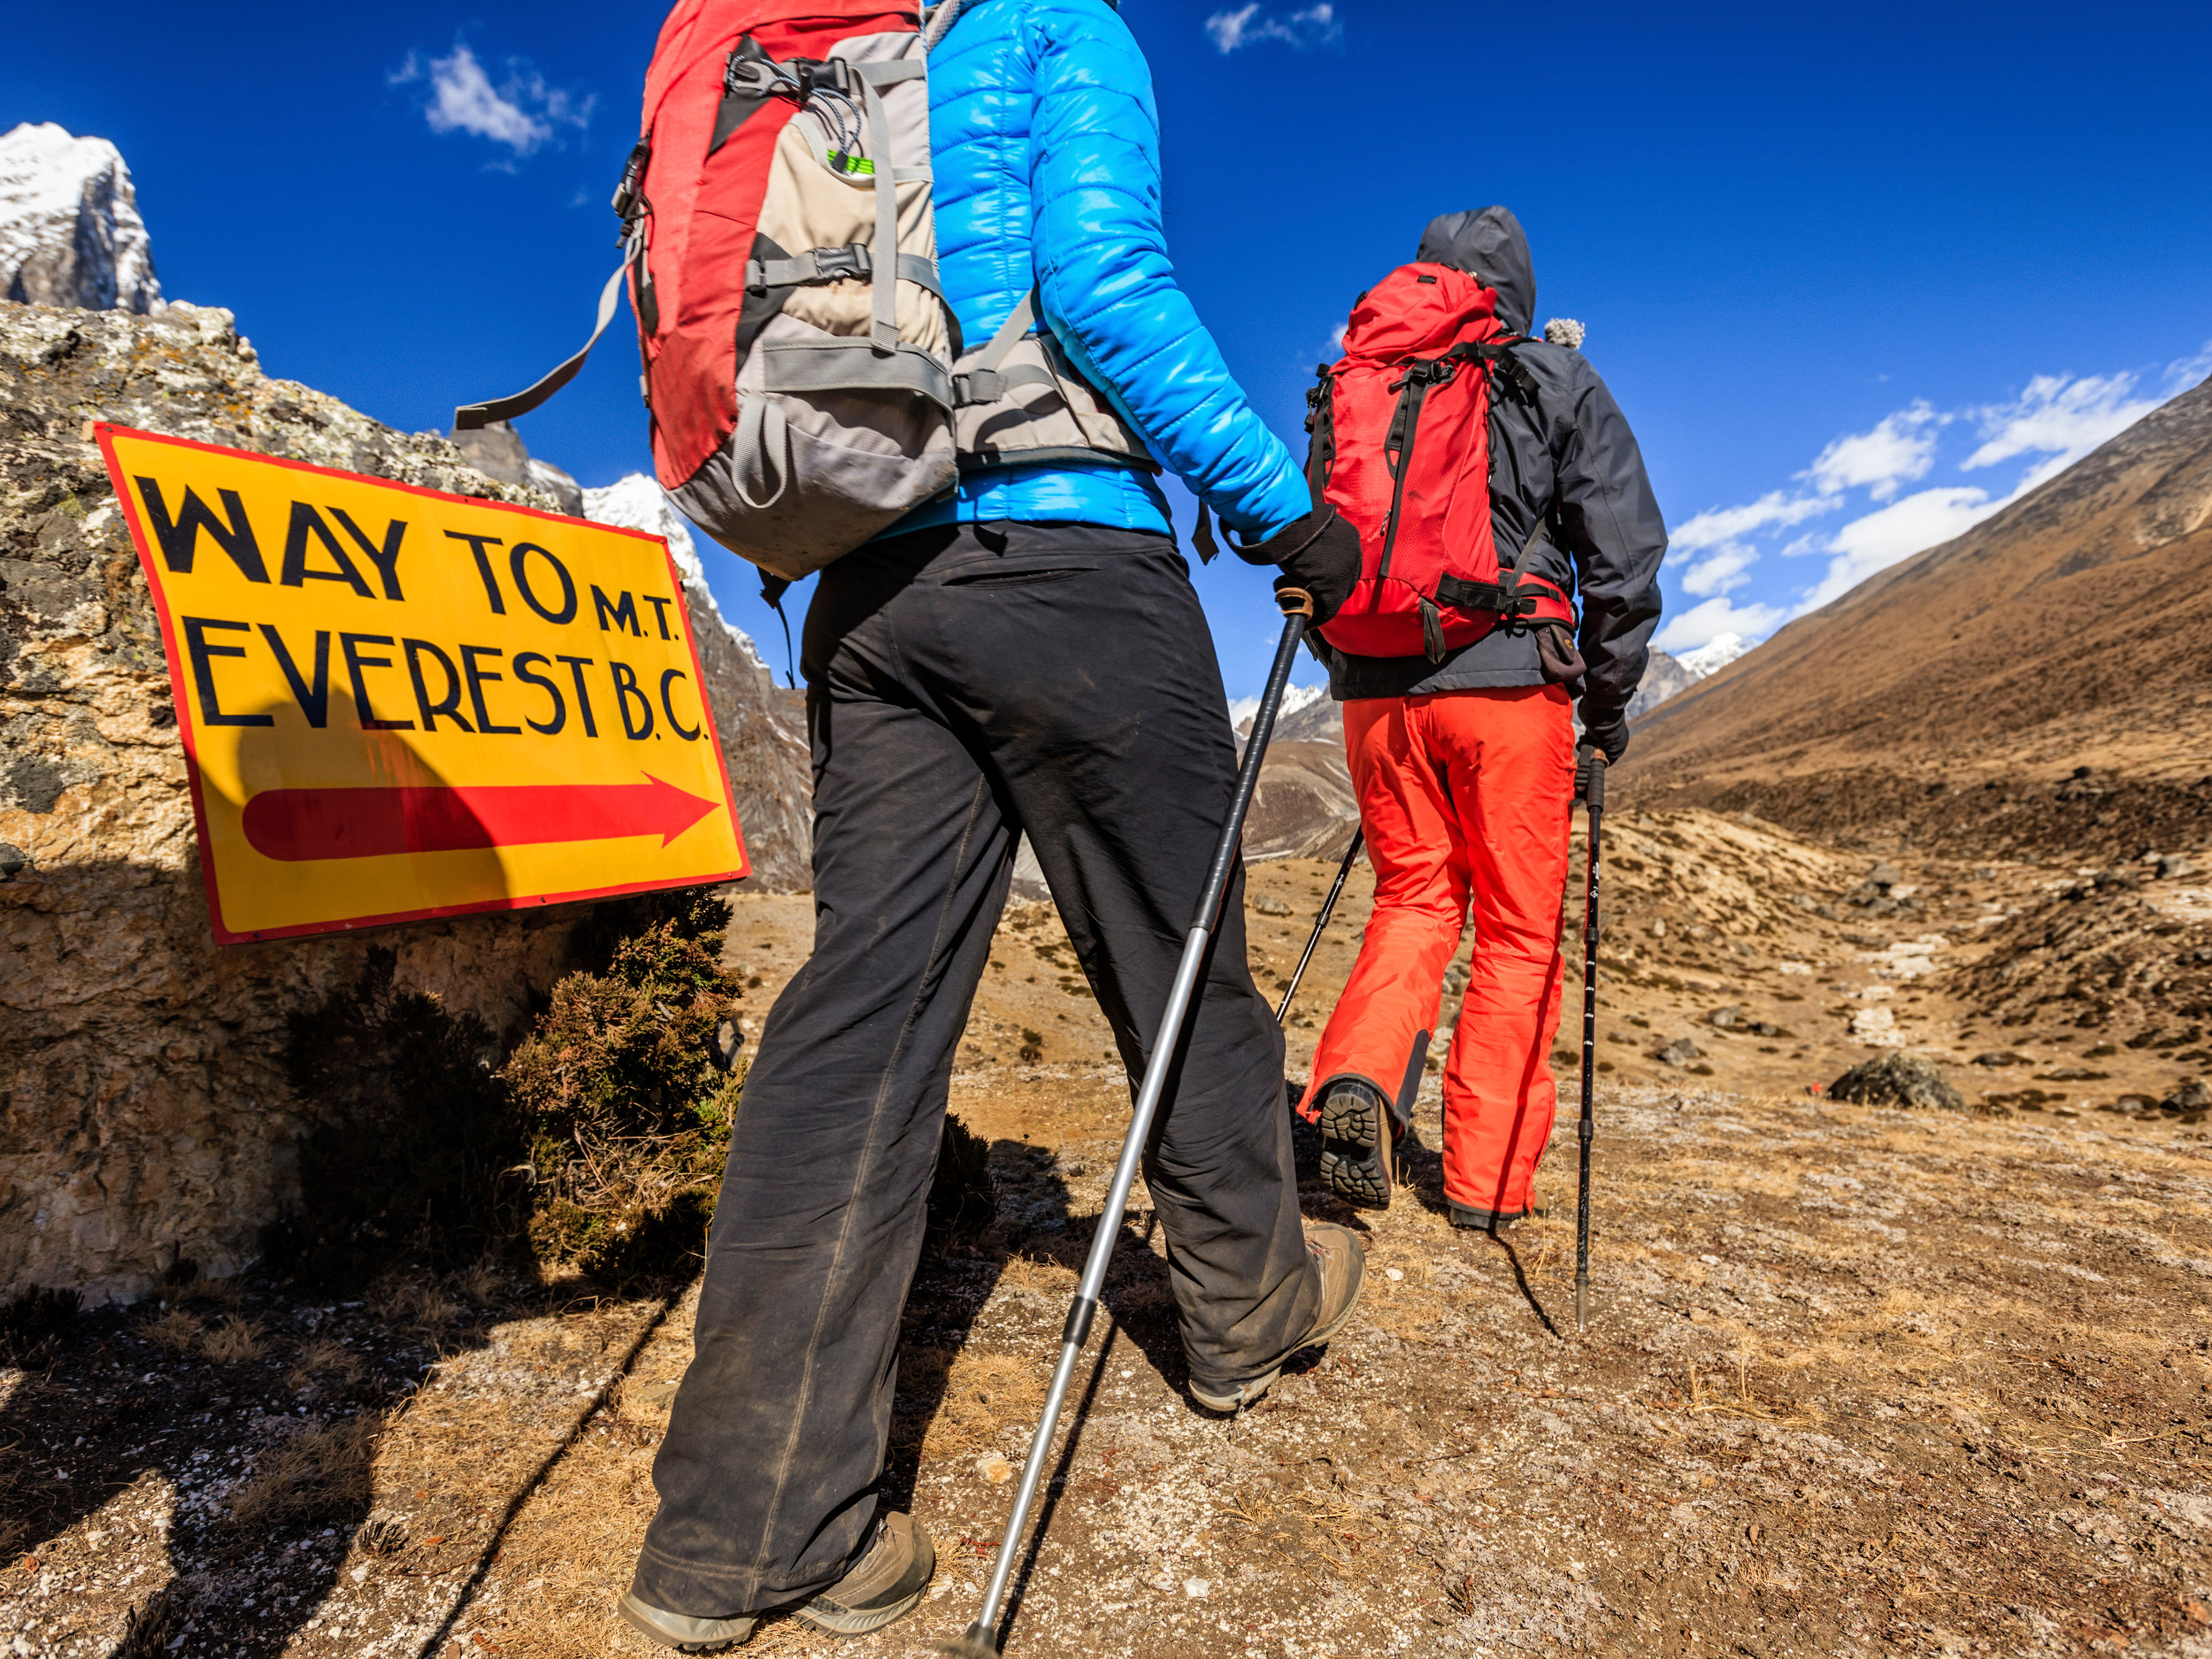 Trekkers en route to Everest Base Camp. Image by Bartosz Hadyniak / Getty Images